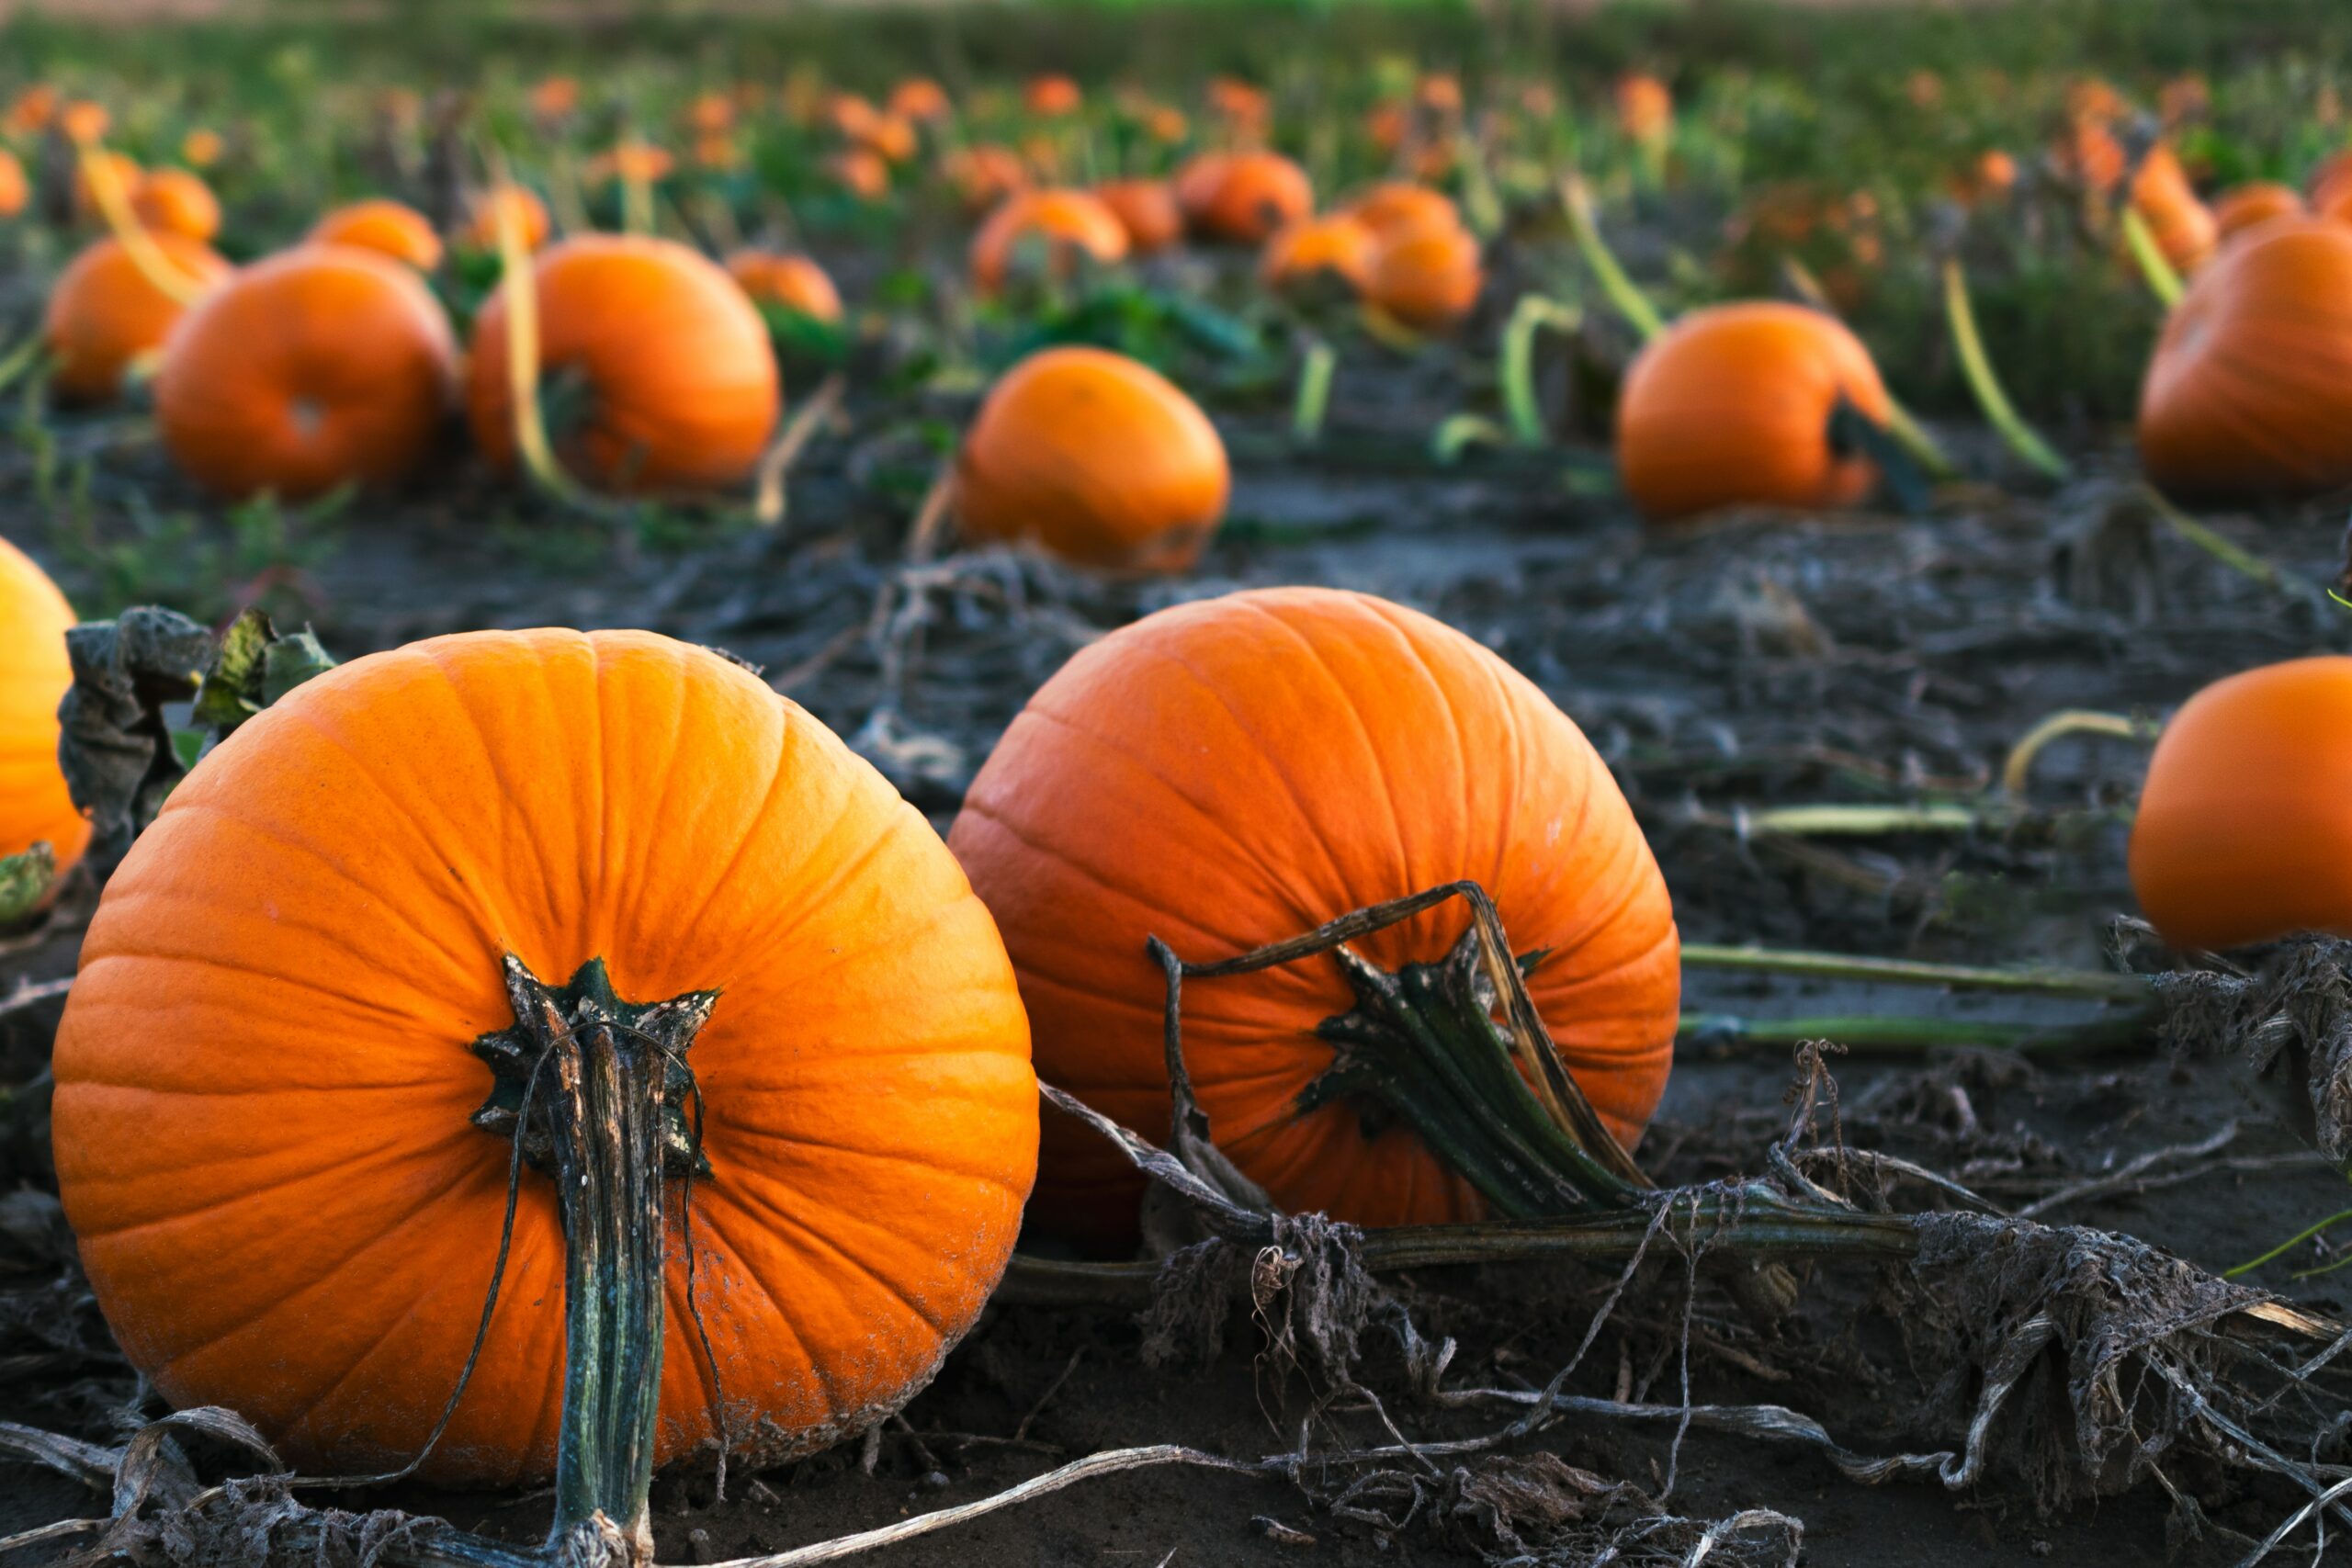 Great Pumpkin Patches To Visit This Fall Near Exton ?